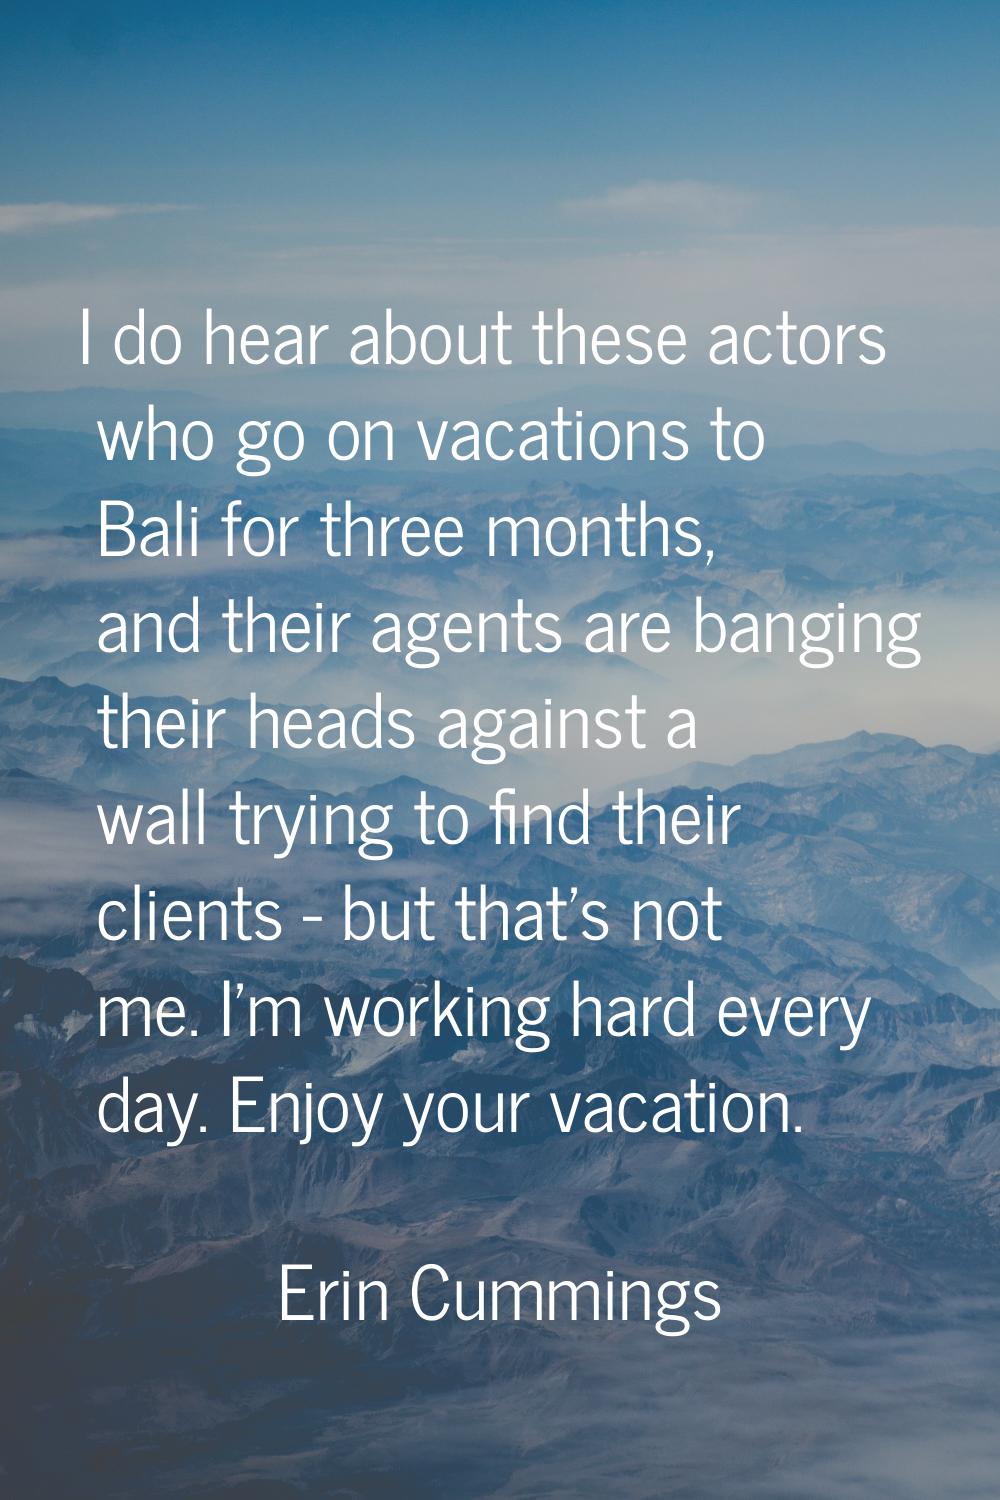 I do hear about these actors who go on vacations to Bali for three months, and their agents are ban